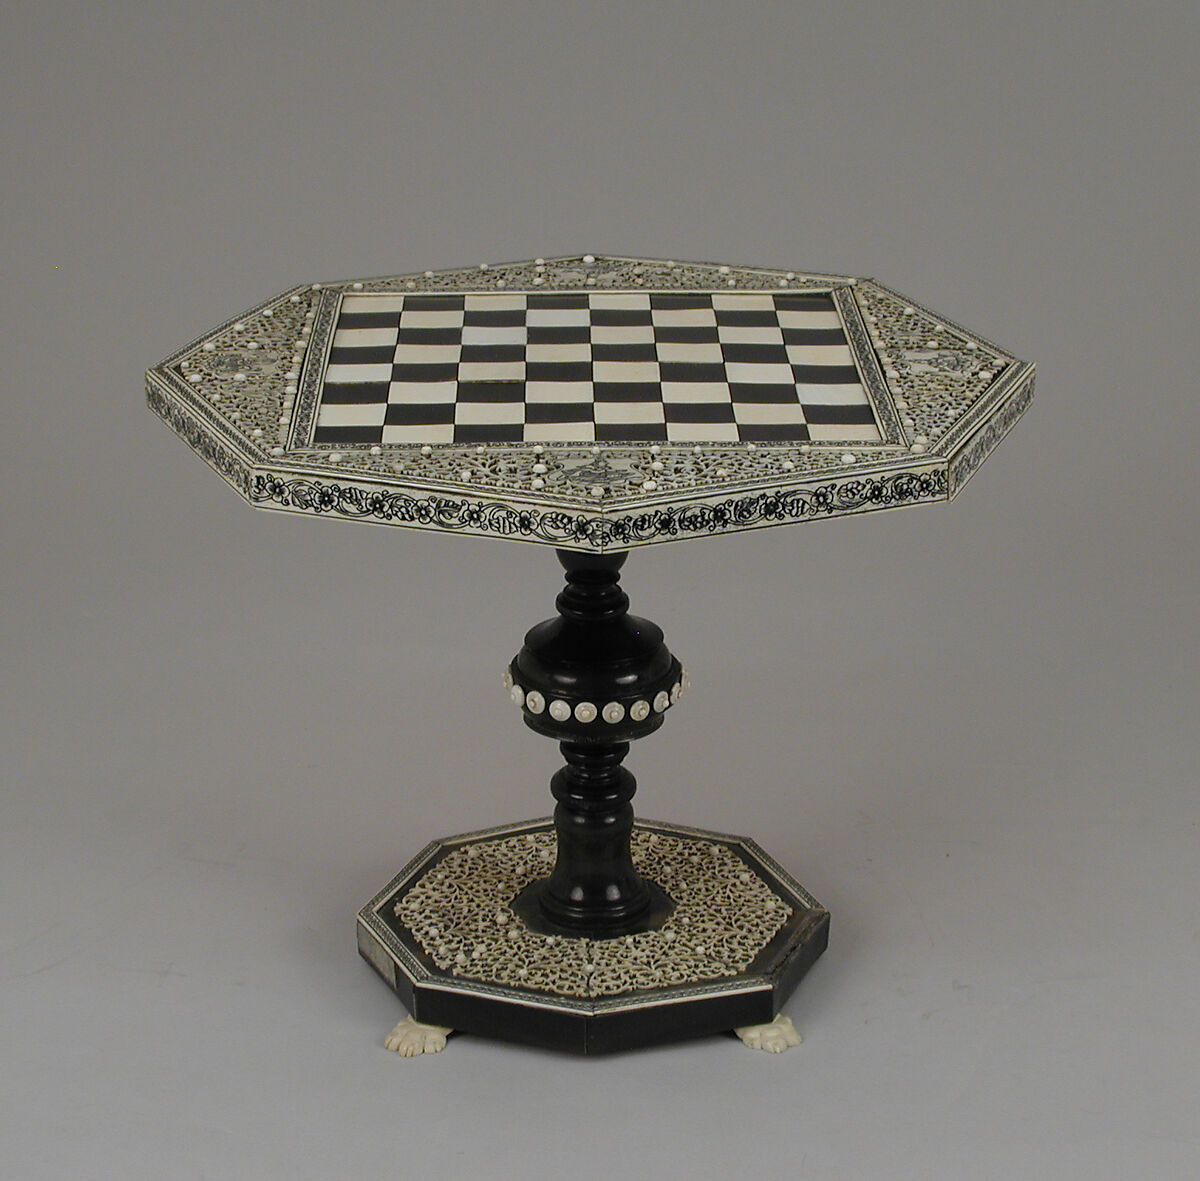 Miniature pedestal table with inlaid chessboard, Ivory, horn, wood, Indian 